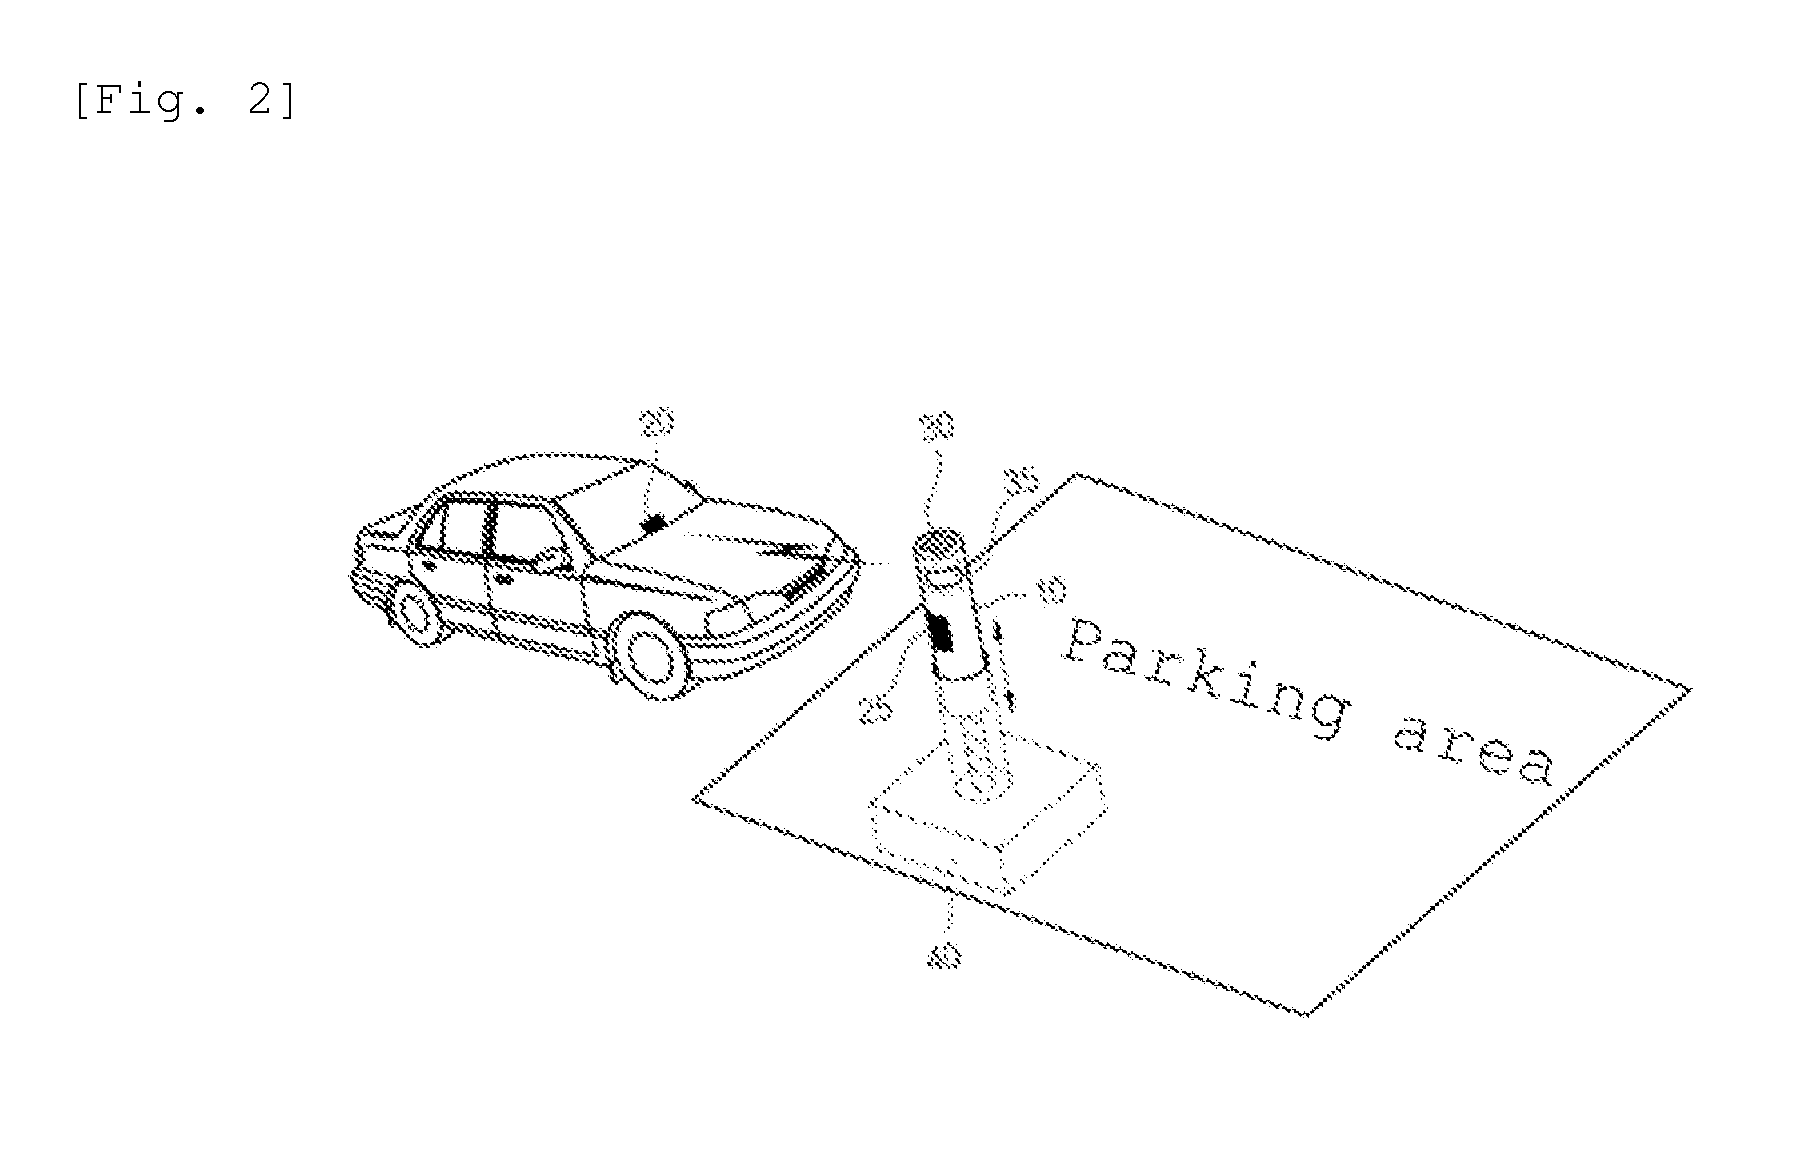 Parking barricate device with sensing vehicle